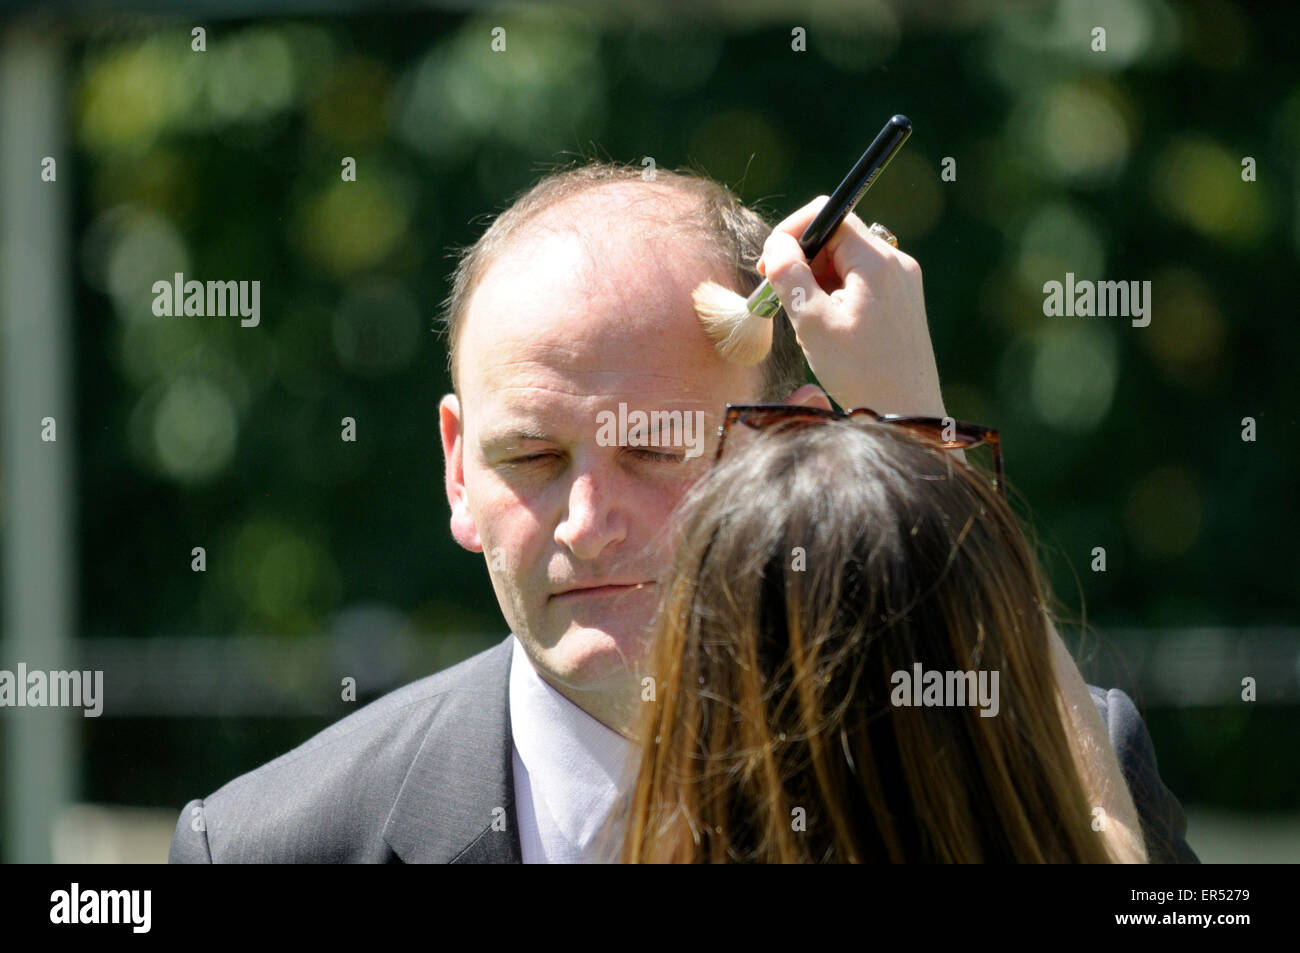 Douglass Carswell being made up before a TV interview on College Green, Westminster Stock Photo